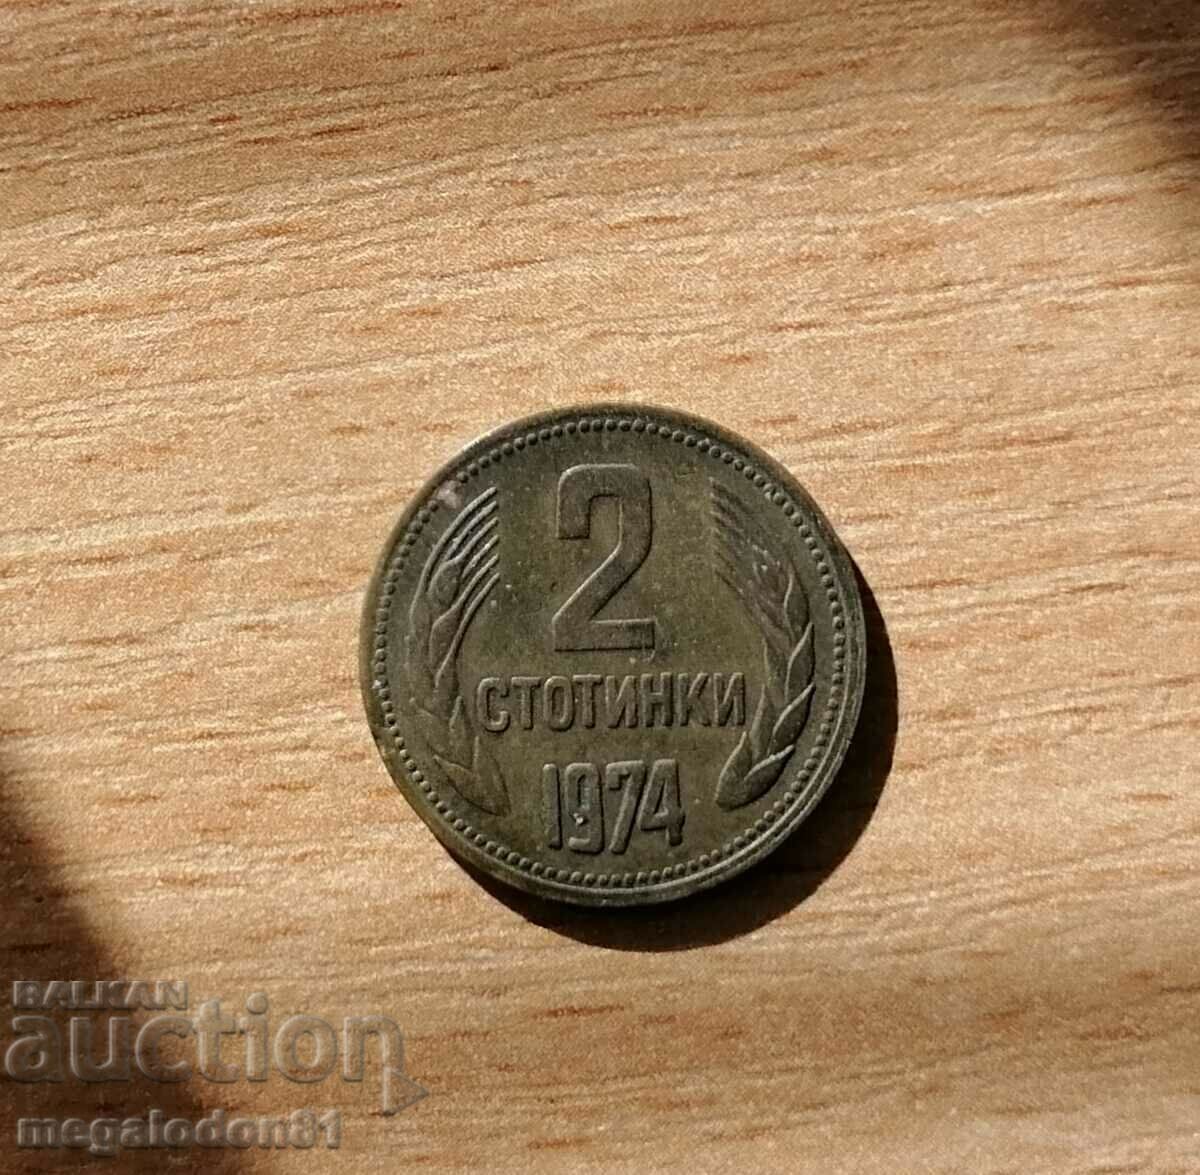 Bulgaria - 2 cents 1974, smooth band